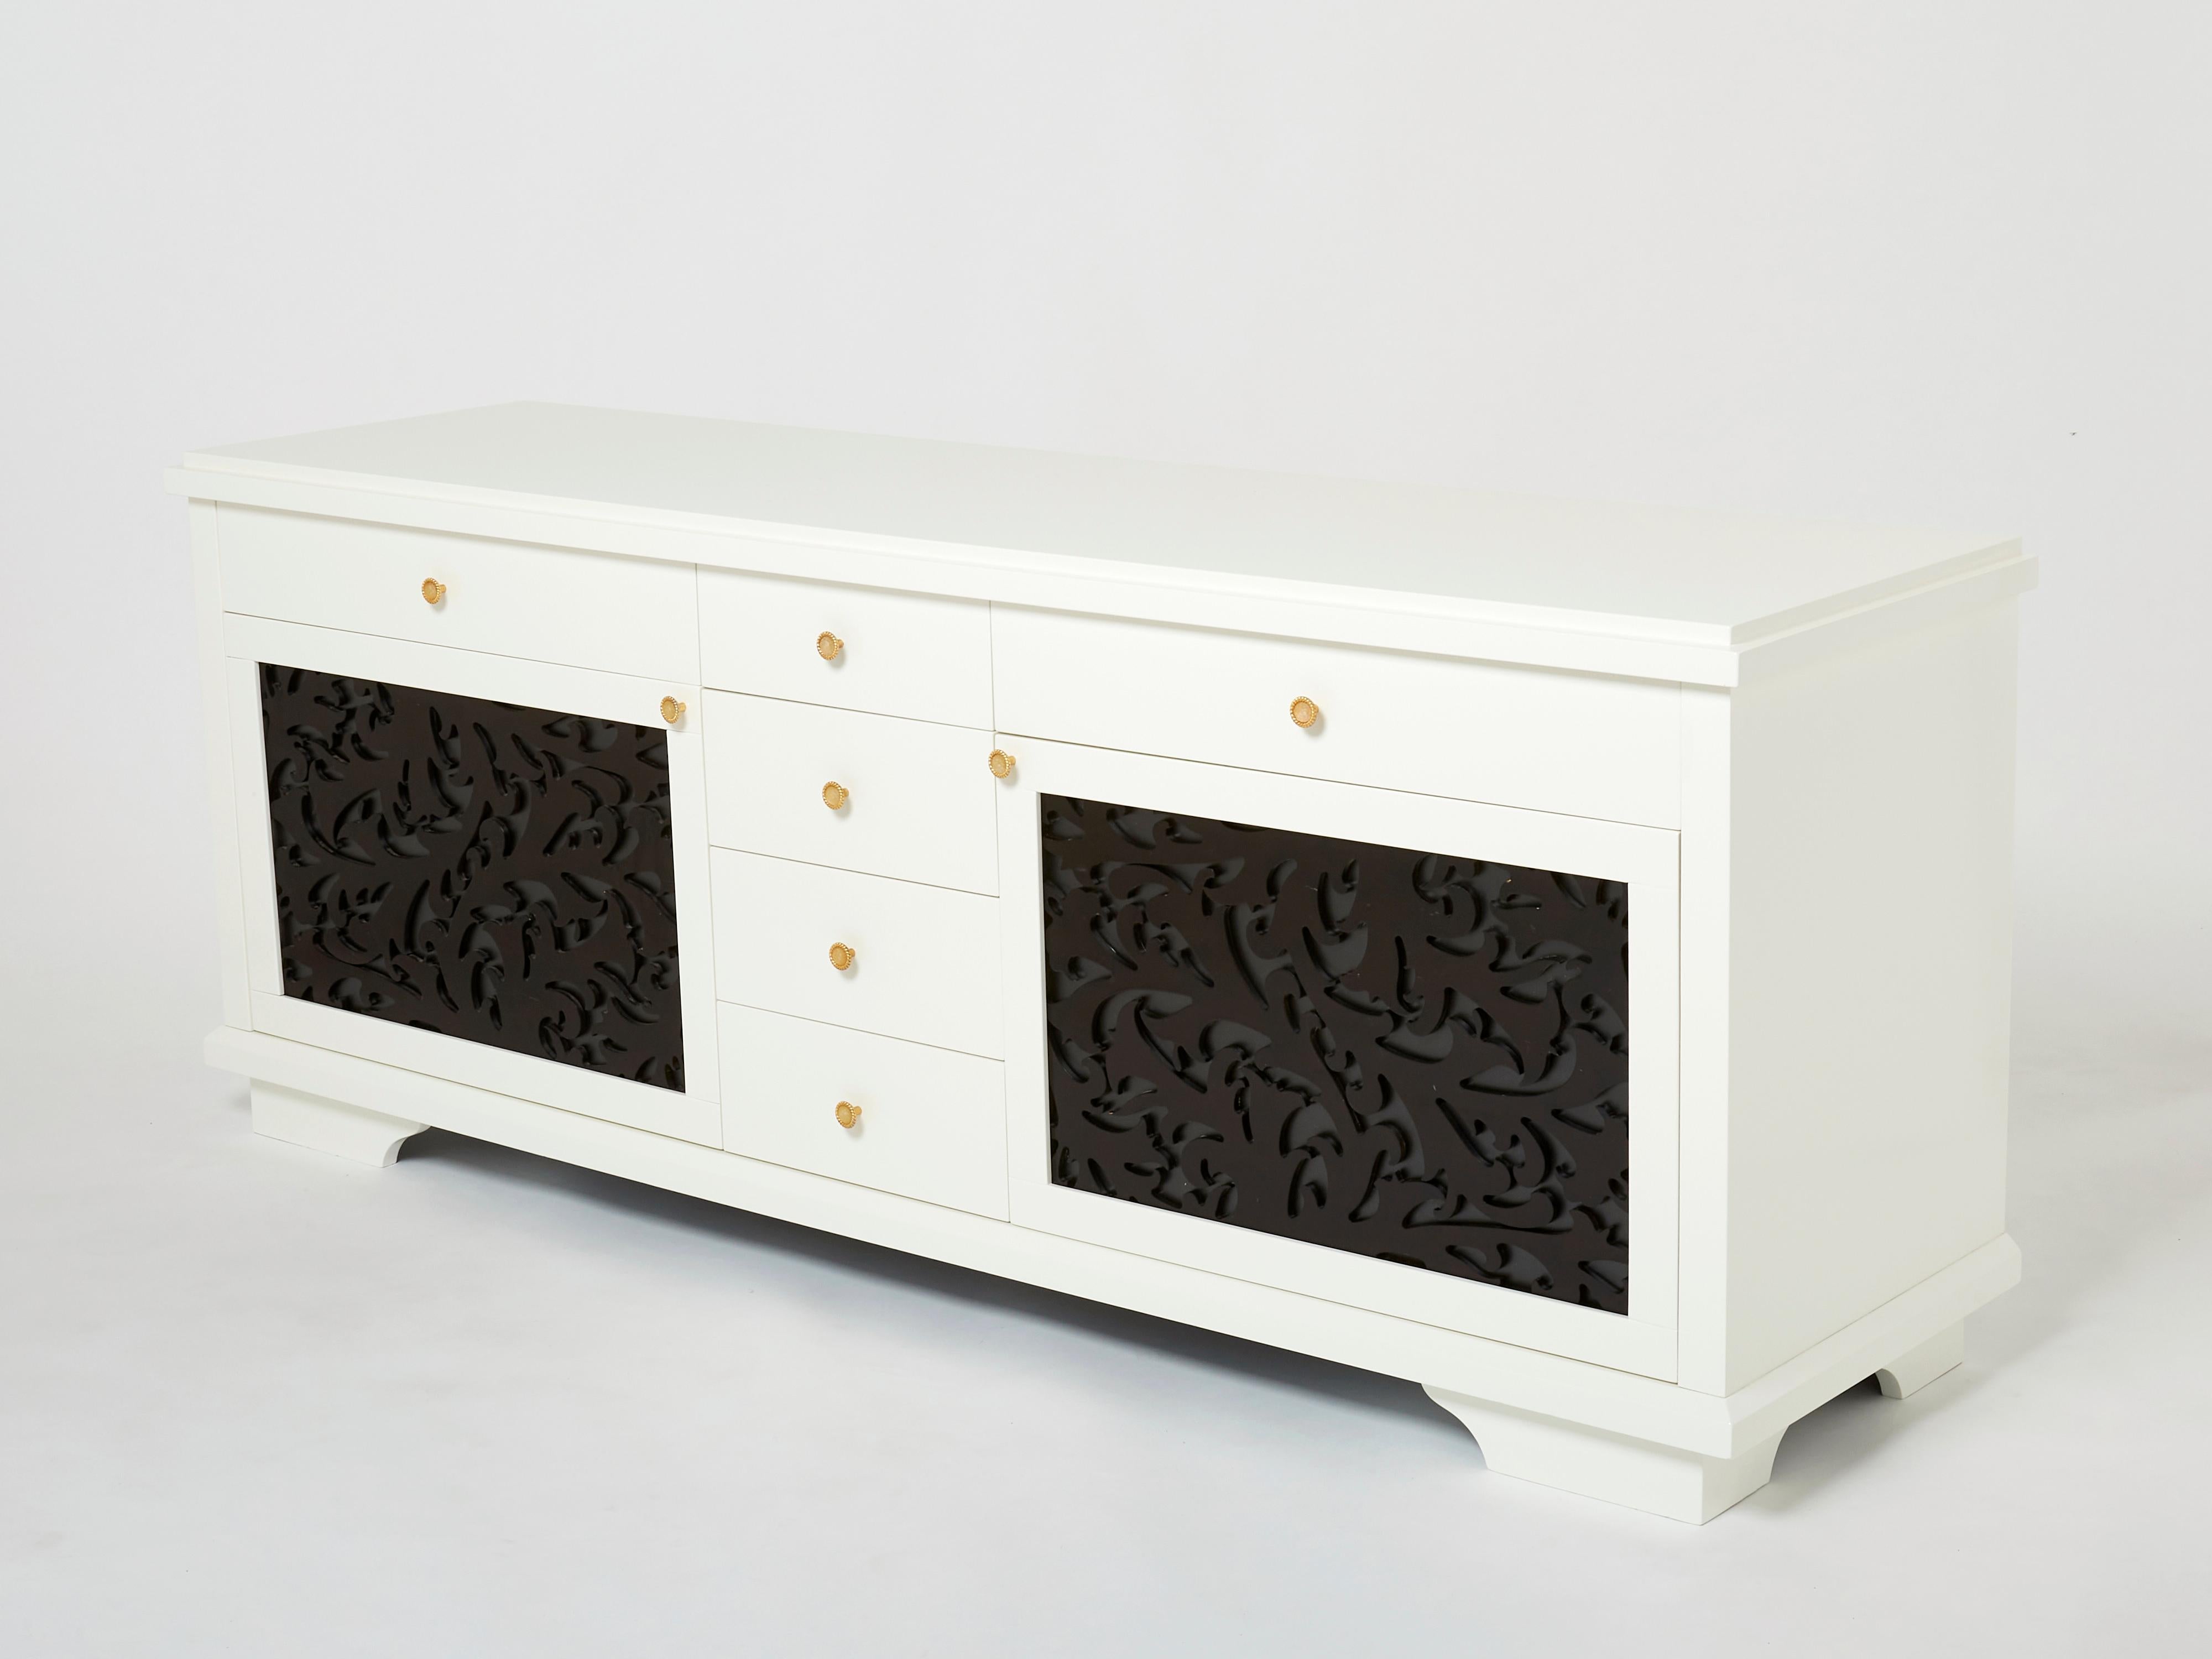 Very rare off white satin and black wood sideboard by Elizabeth Garouste & Mattia Bonetti designed for Christian Lacroix boutique opening rue du Faubourg Saint Honoré in 1987. The iconic duo were hired by Christian Lacroix to create the complete